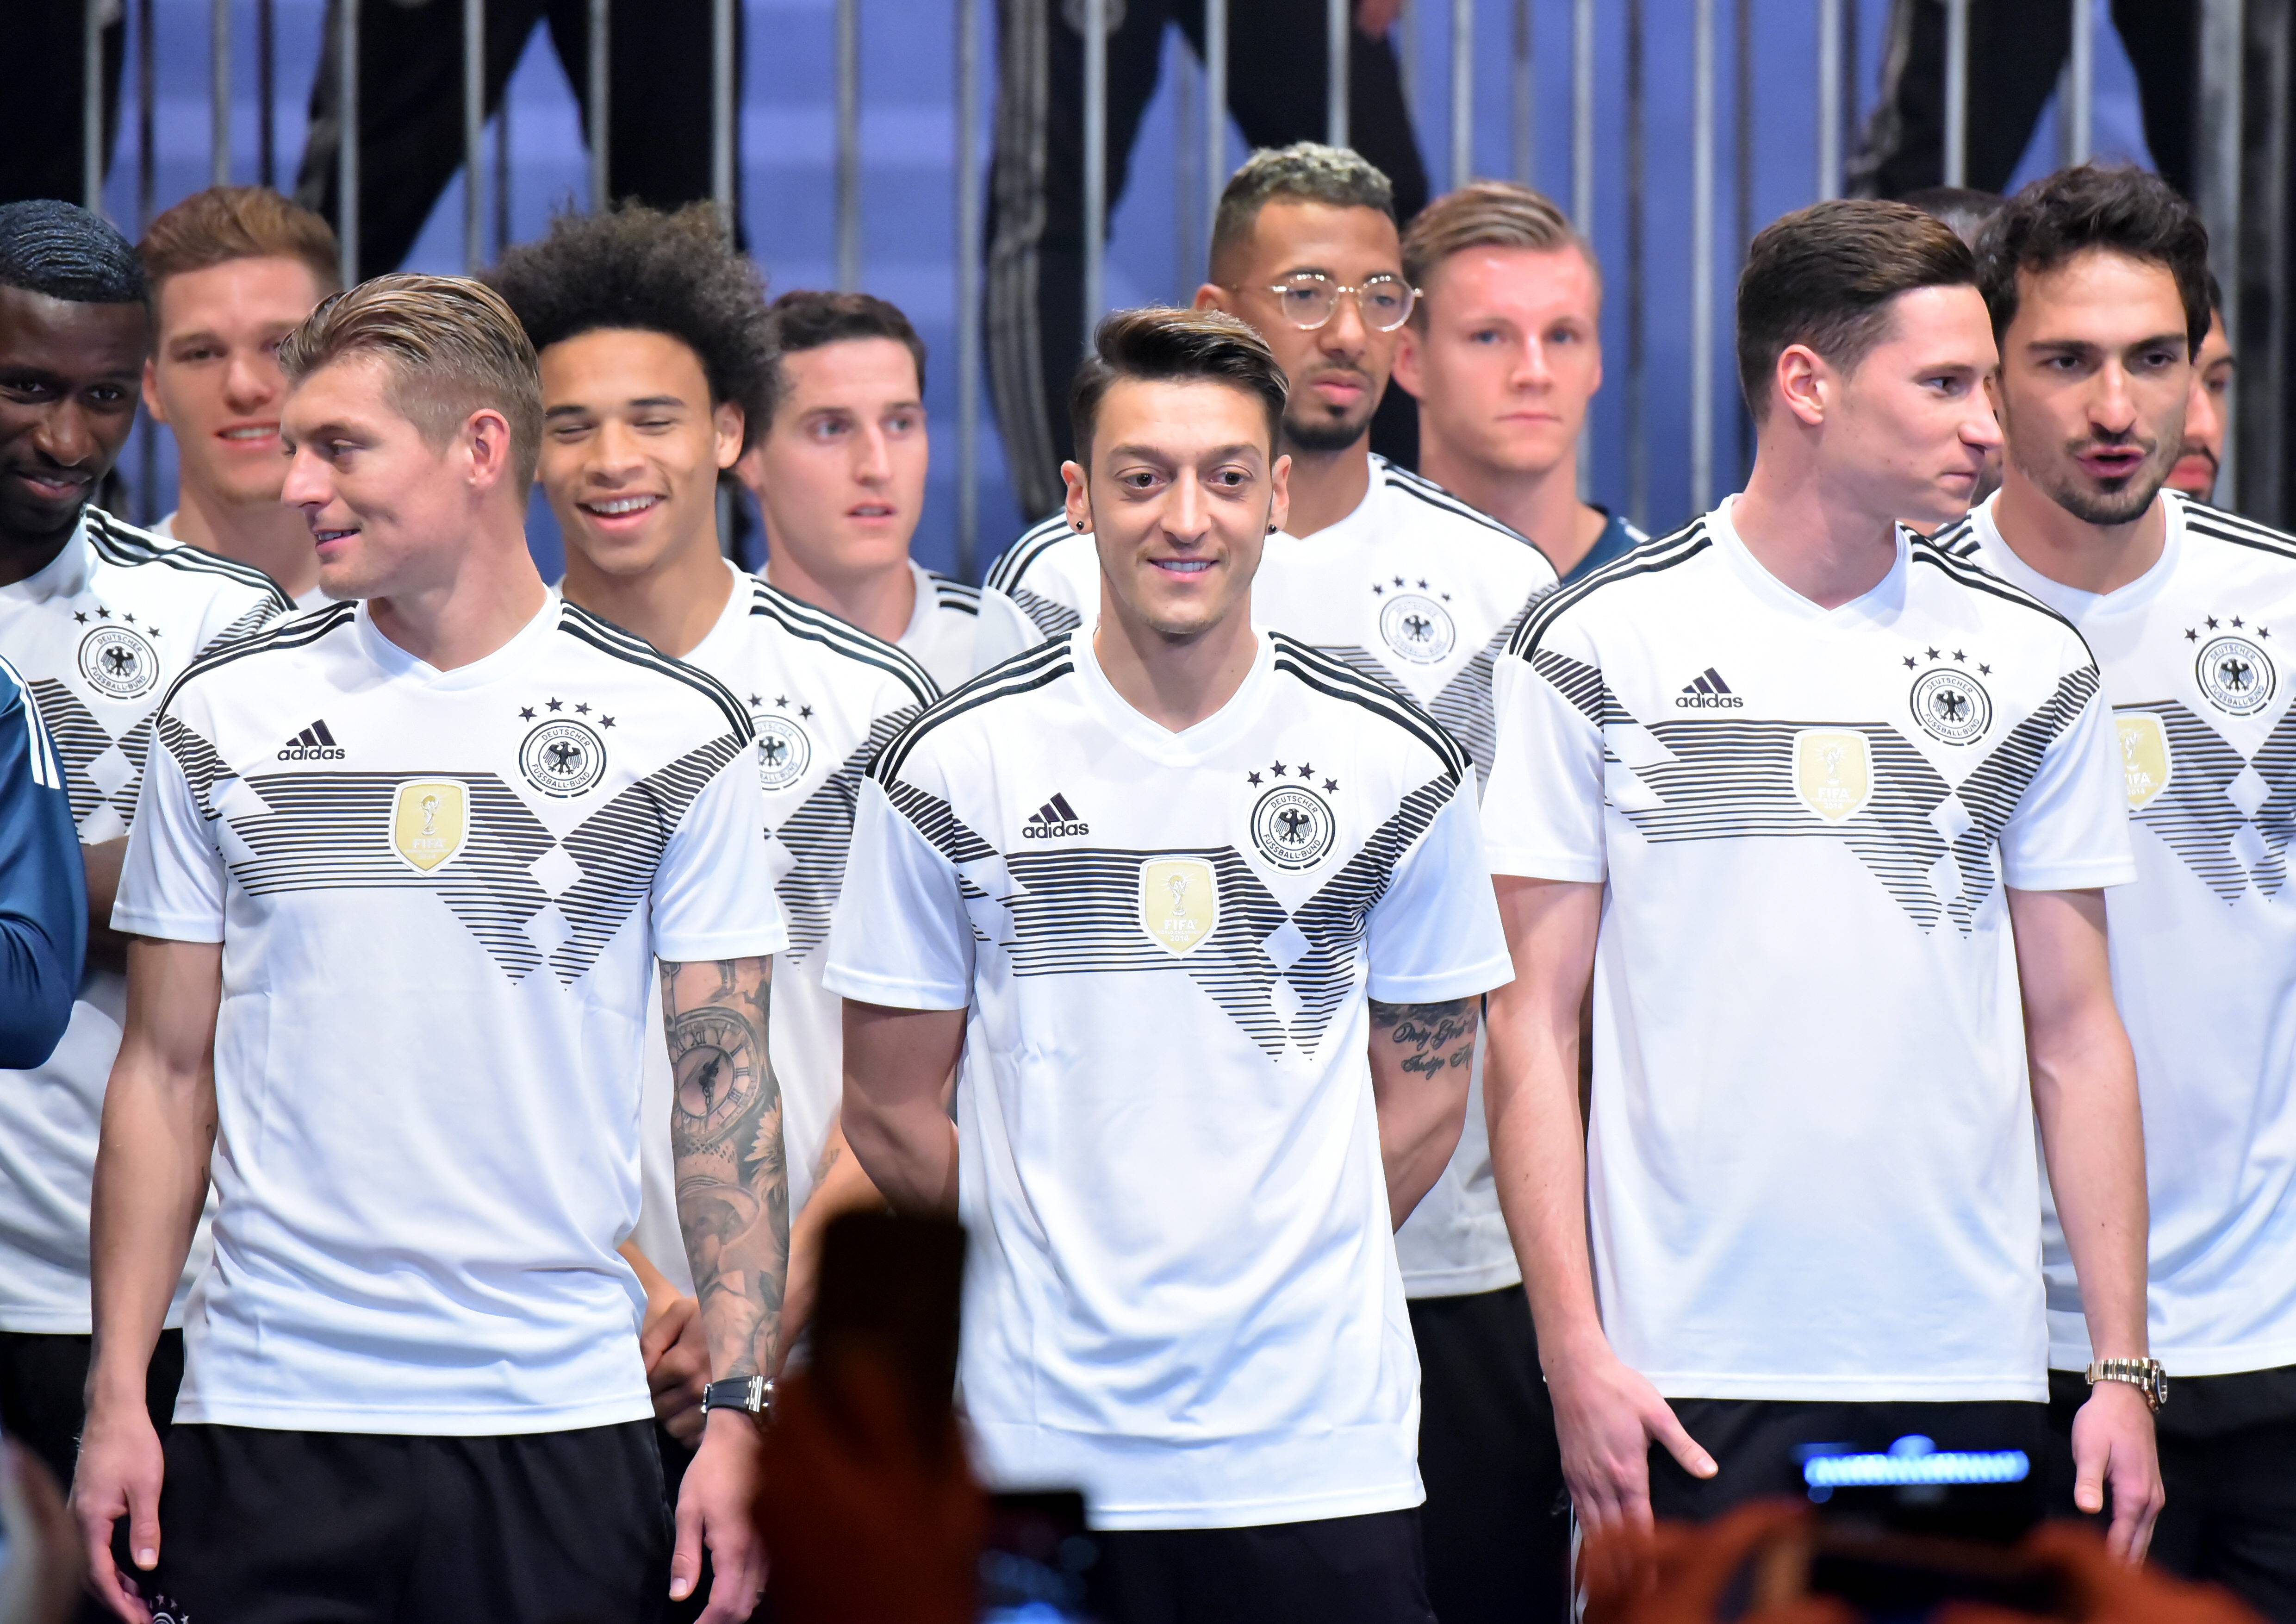 Your 2018 World Cup Jersey Preview